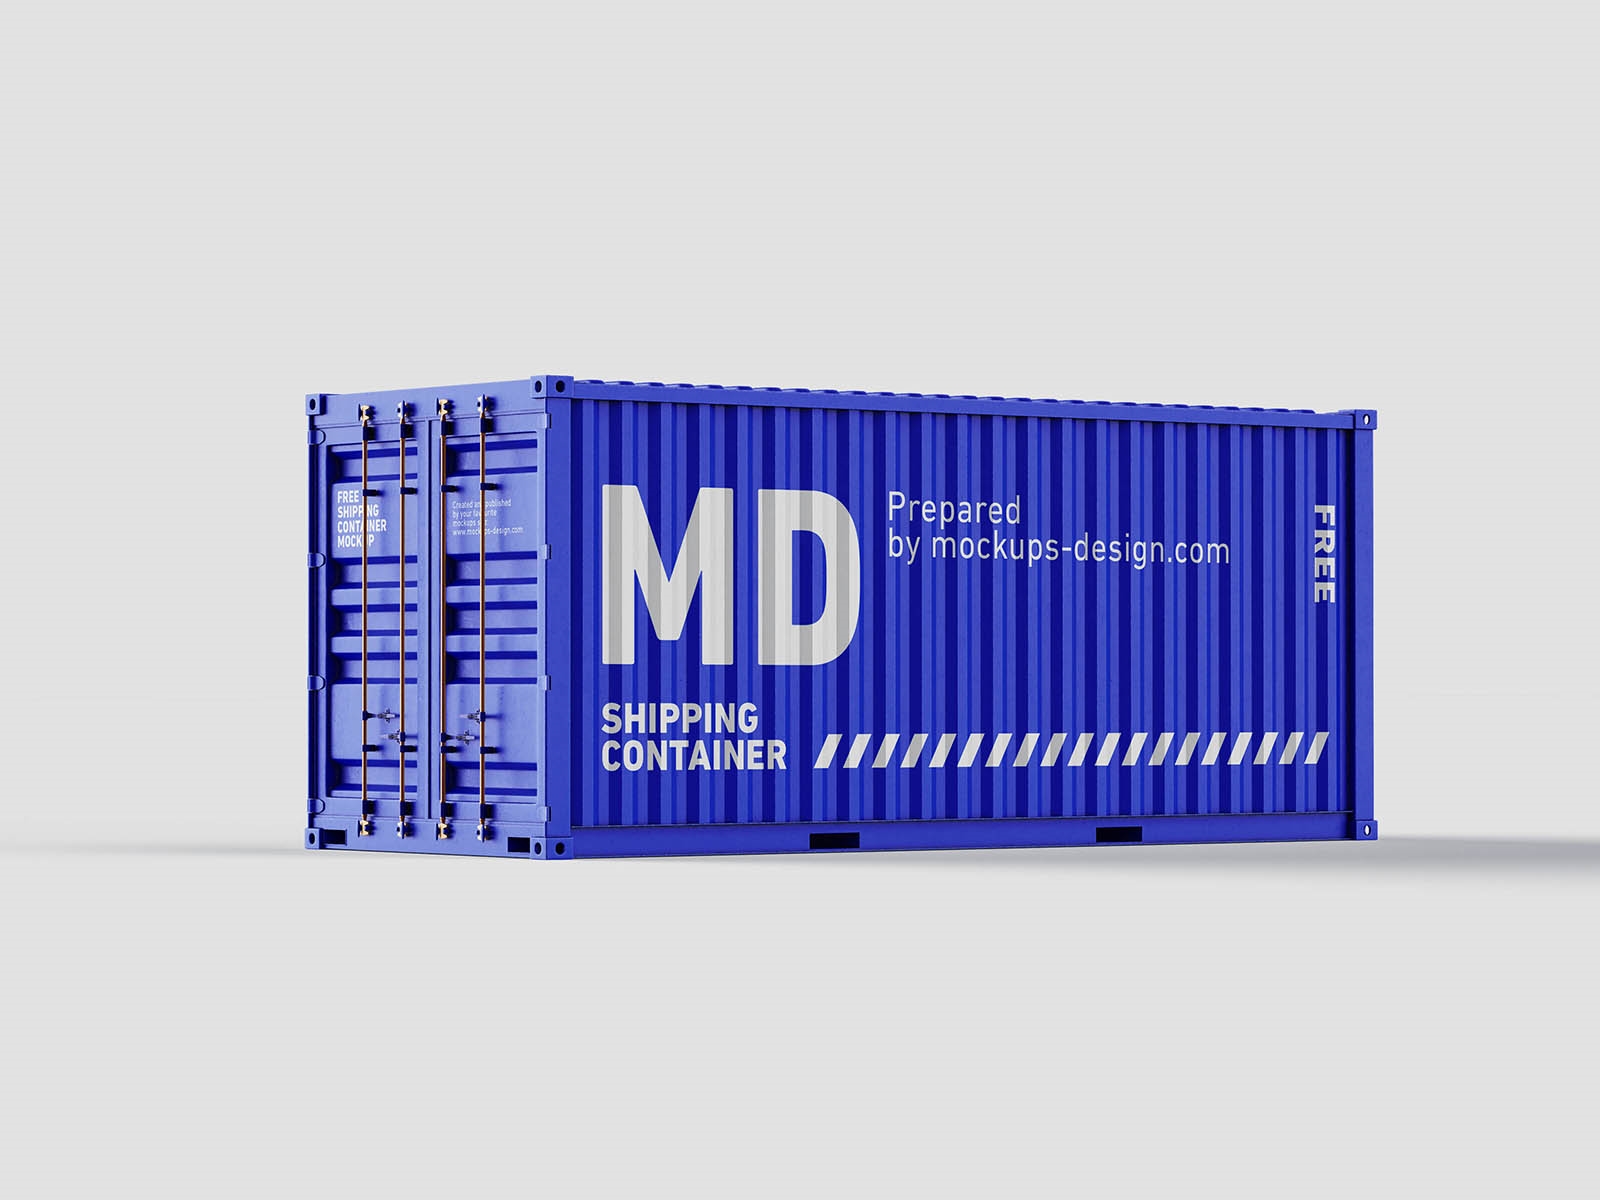 Front and Perspective View of 4 Shipping Container Mockups FREE PSD